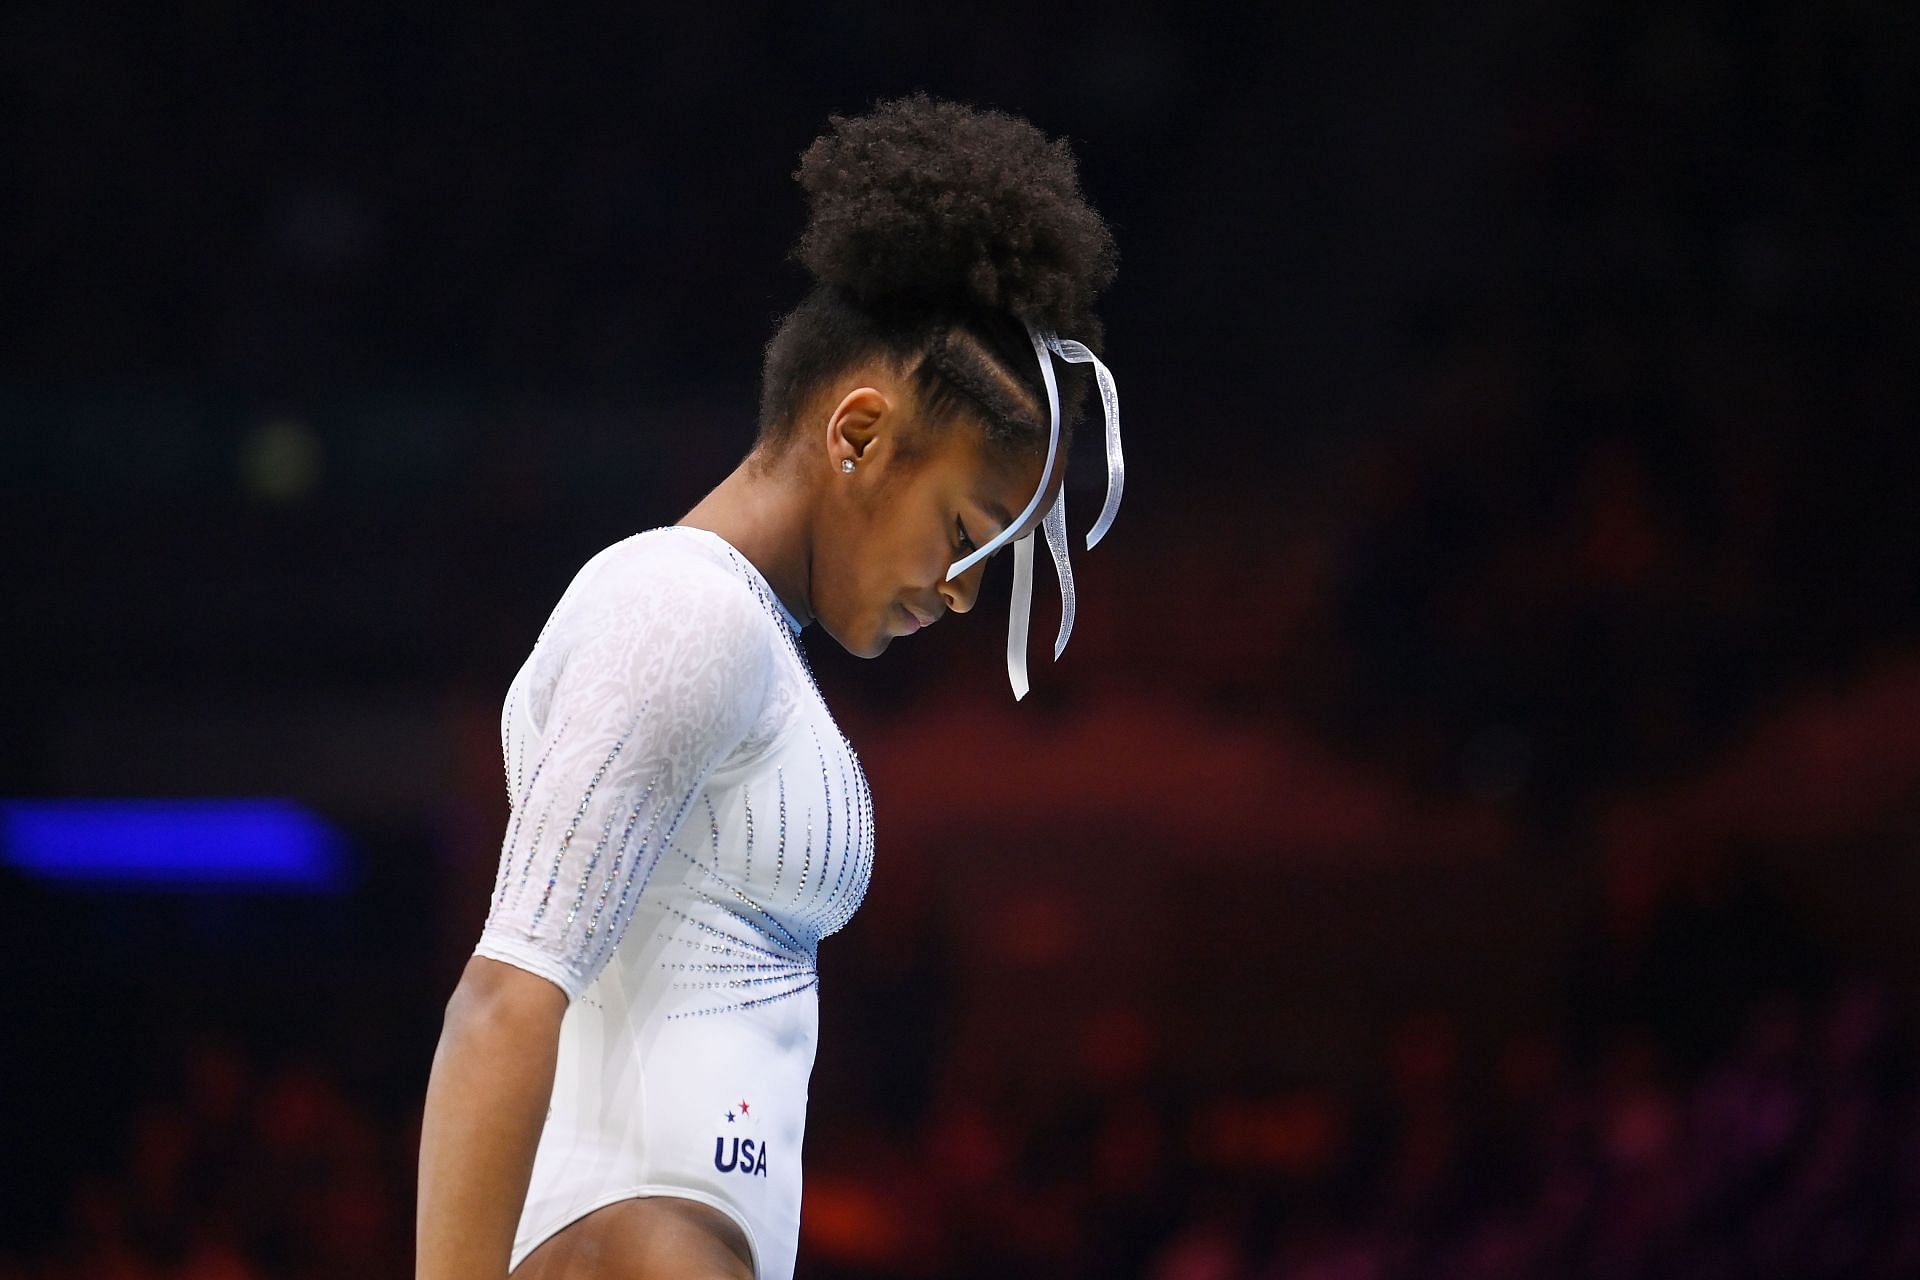 Skye Blakely suffered an injury during the podium training ahead of the 2024 U.S. Olympic Trials - Getty Images